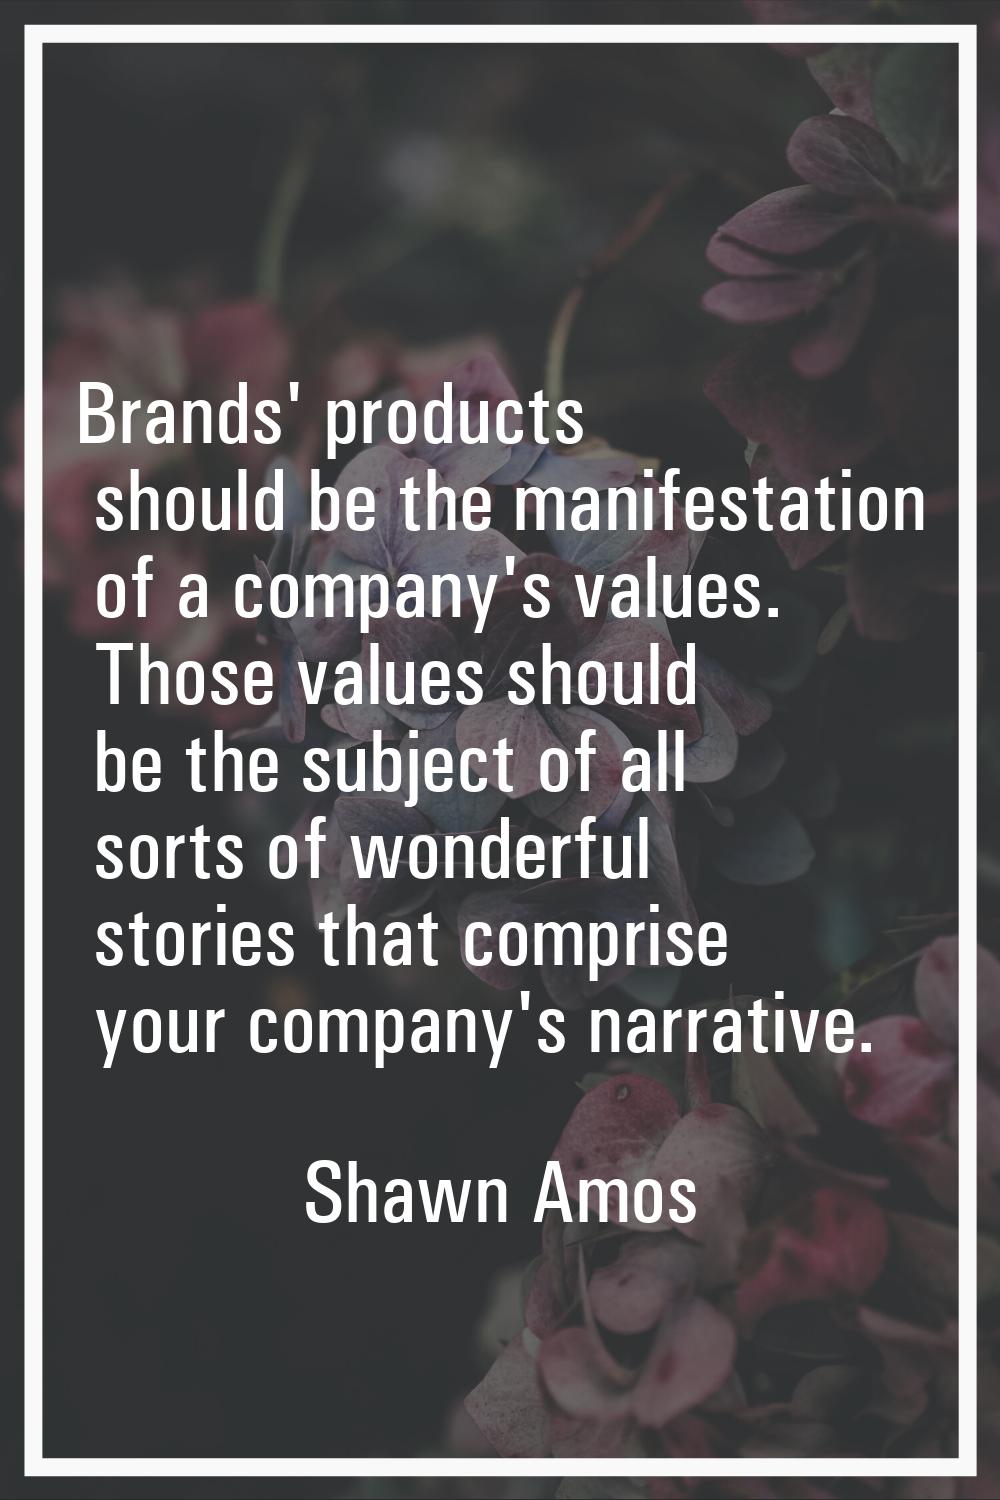 Brands' products should be the manifestation of a company's values. Those values should be the subj